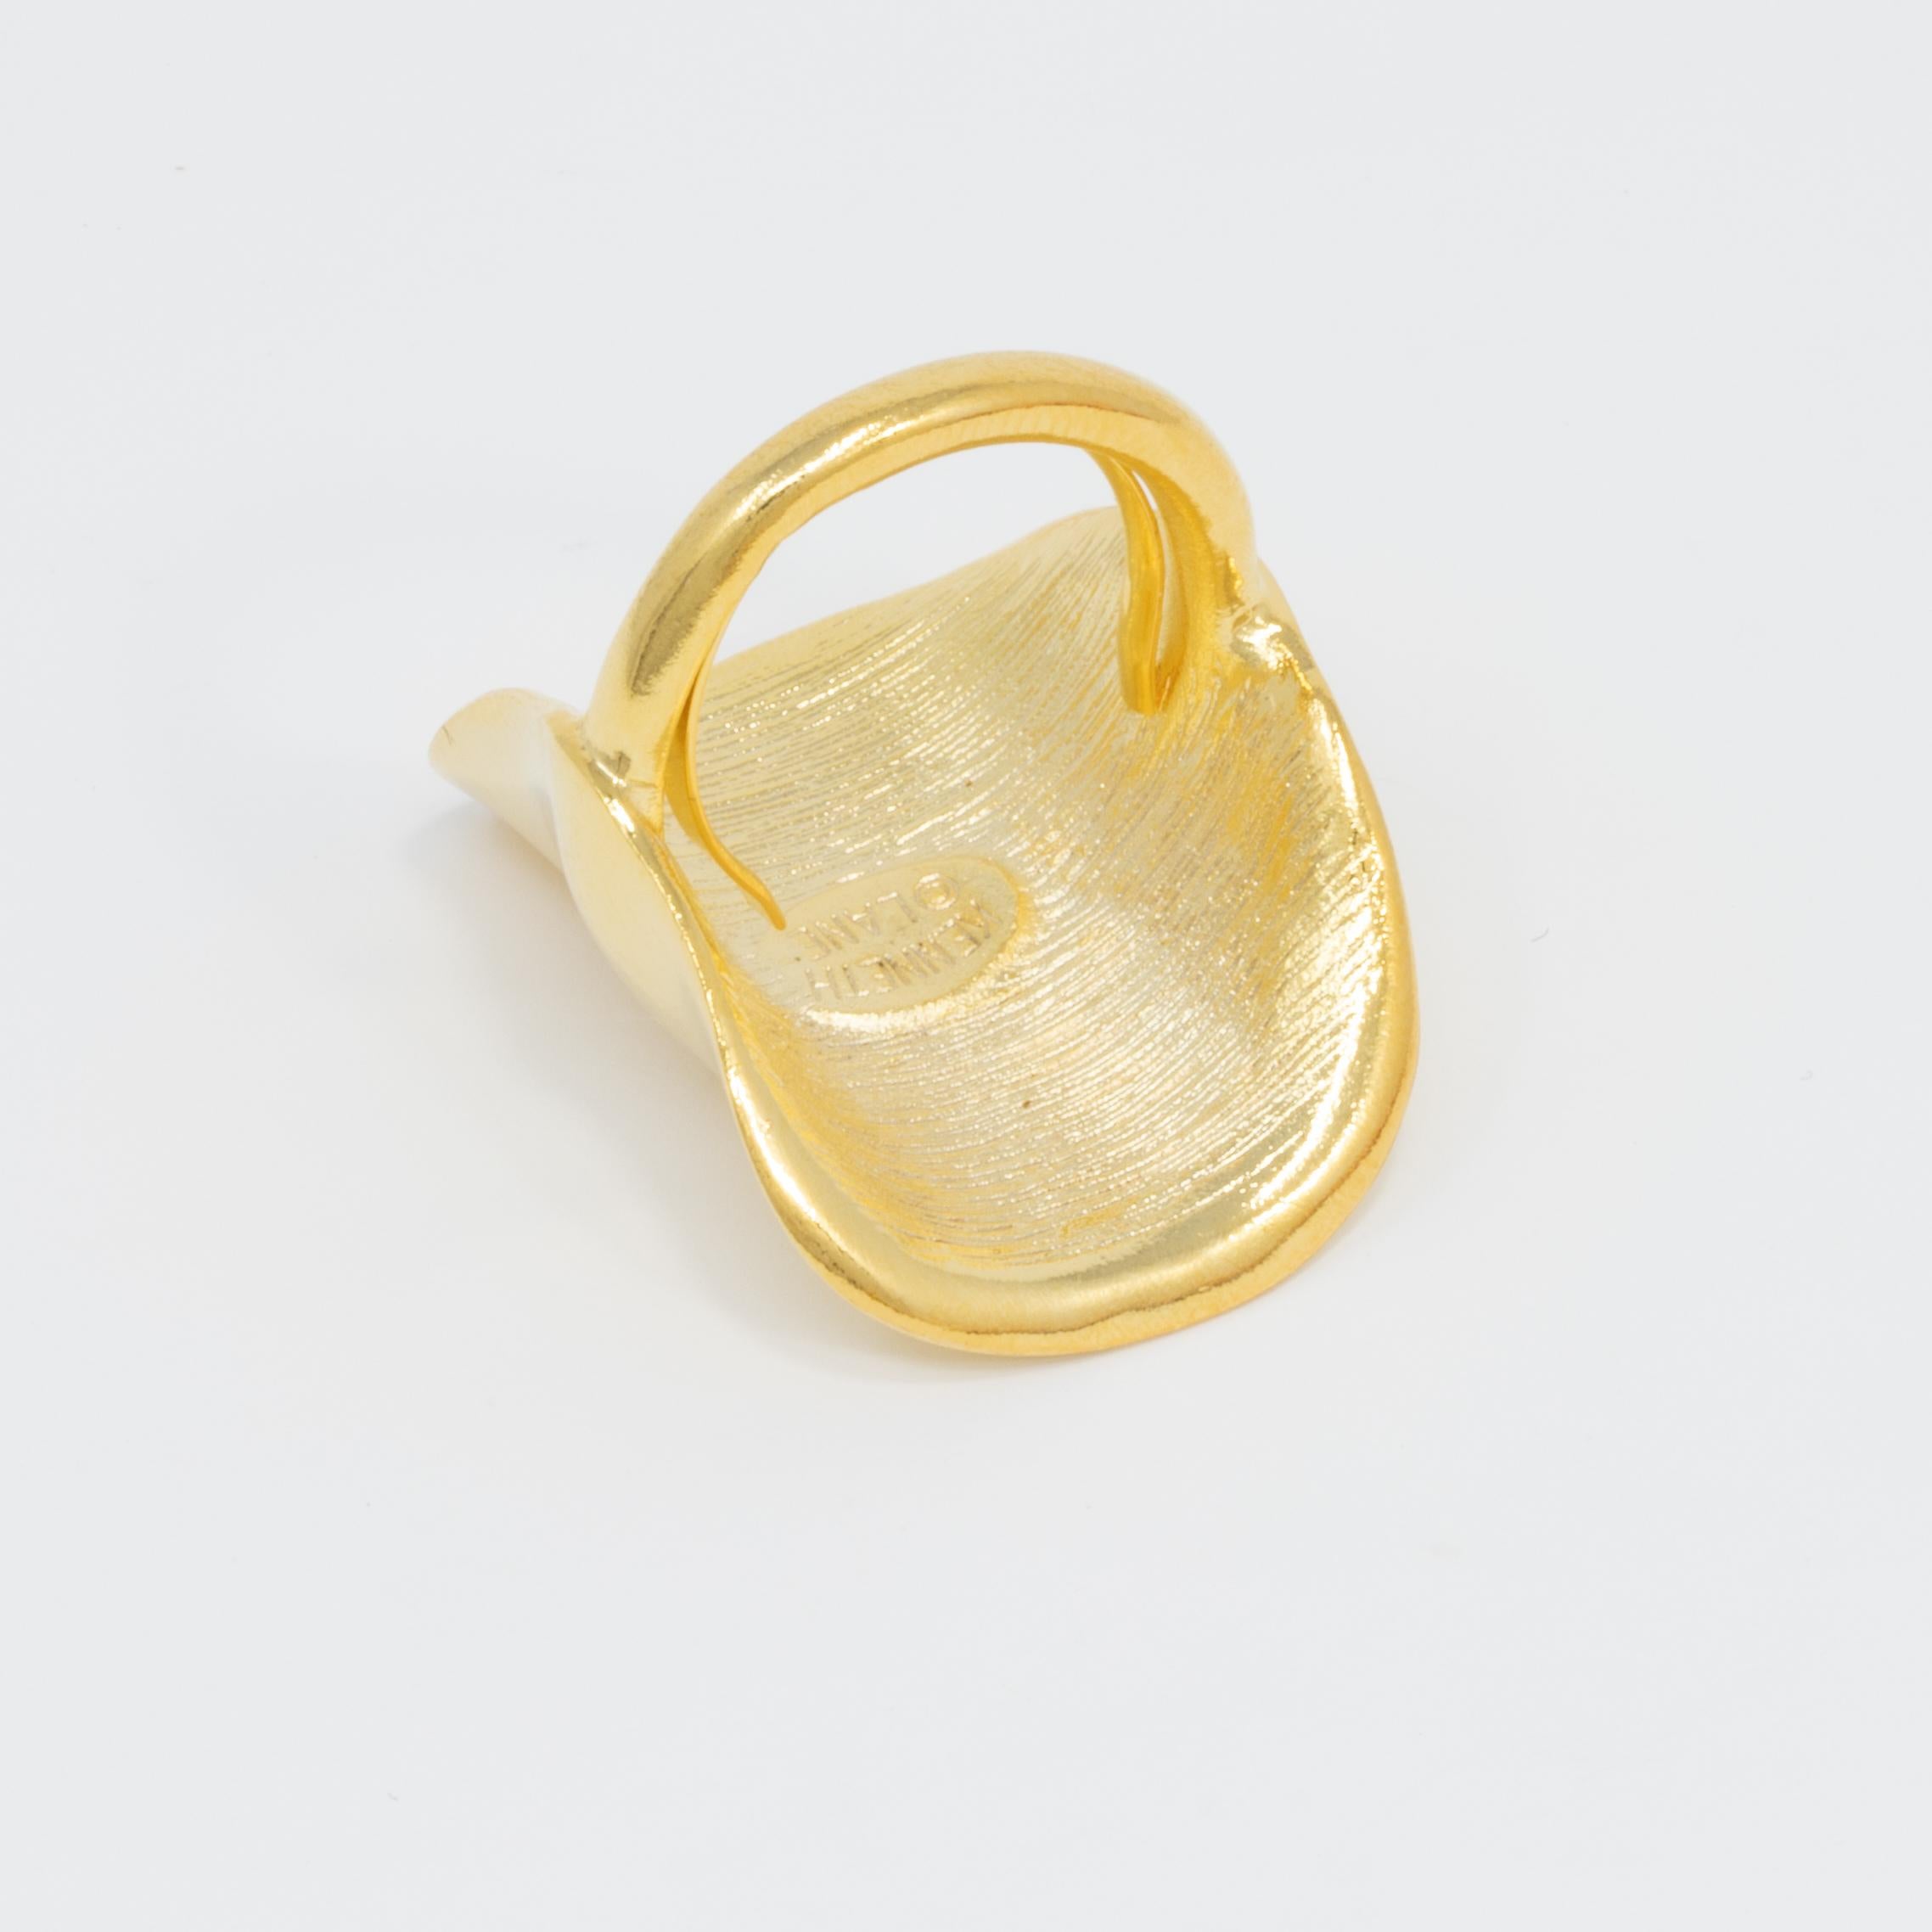 A flashy, polished-gold, statement ring. Add a perfect touch of golden glow with this ring from Kenneth Jay Lane!

Gold-plated.

Adjustable sizes 5 to 8.5 

Tags, Marks, Hallmarks: Kenneth Lane